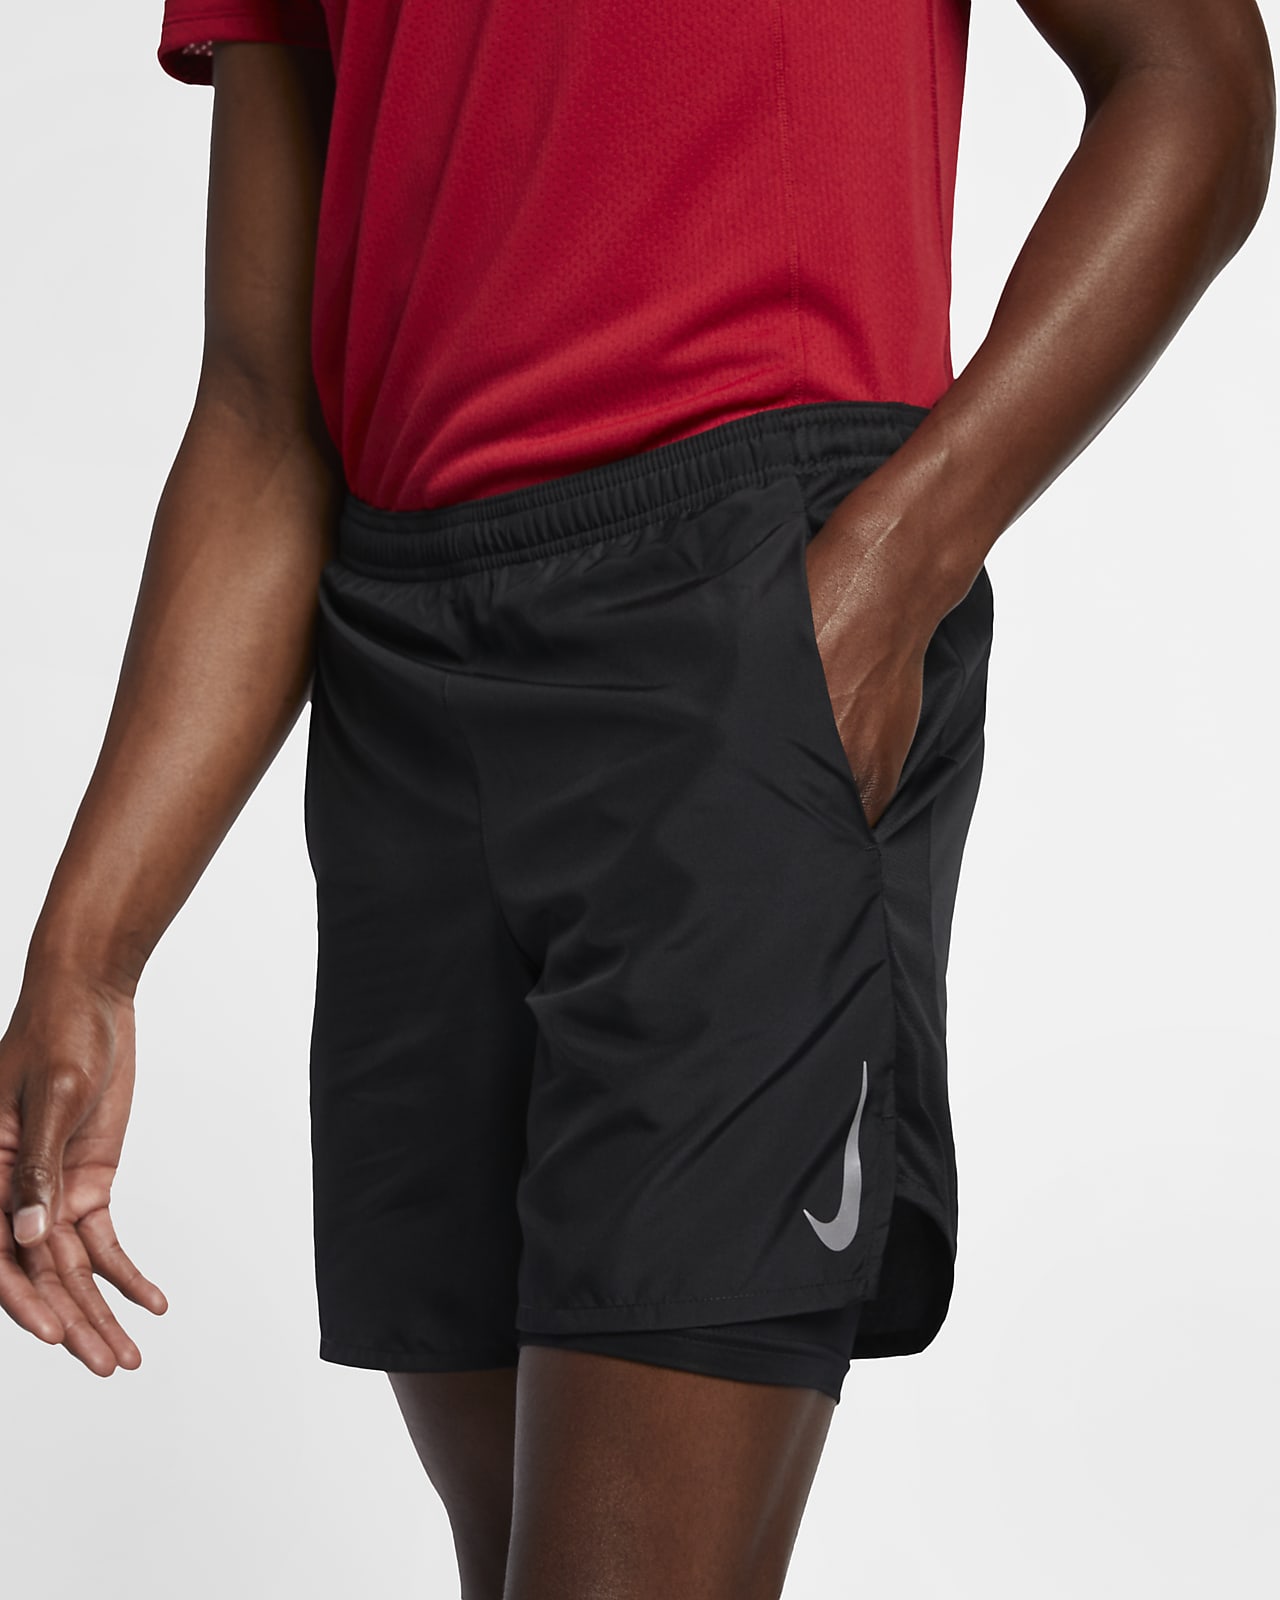 nike challenger shorts red